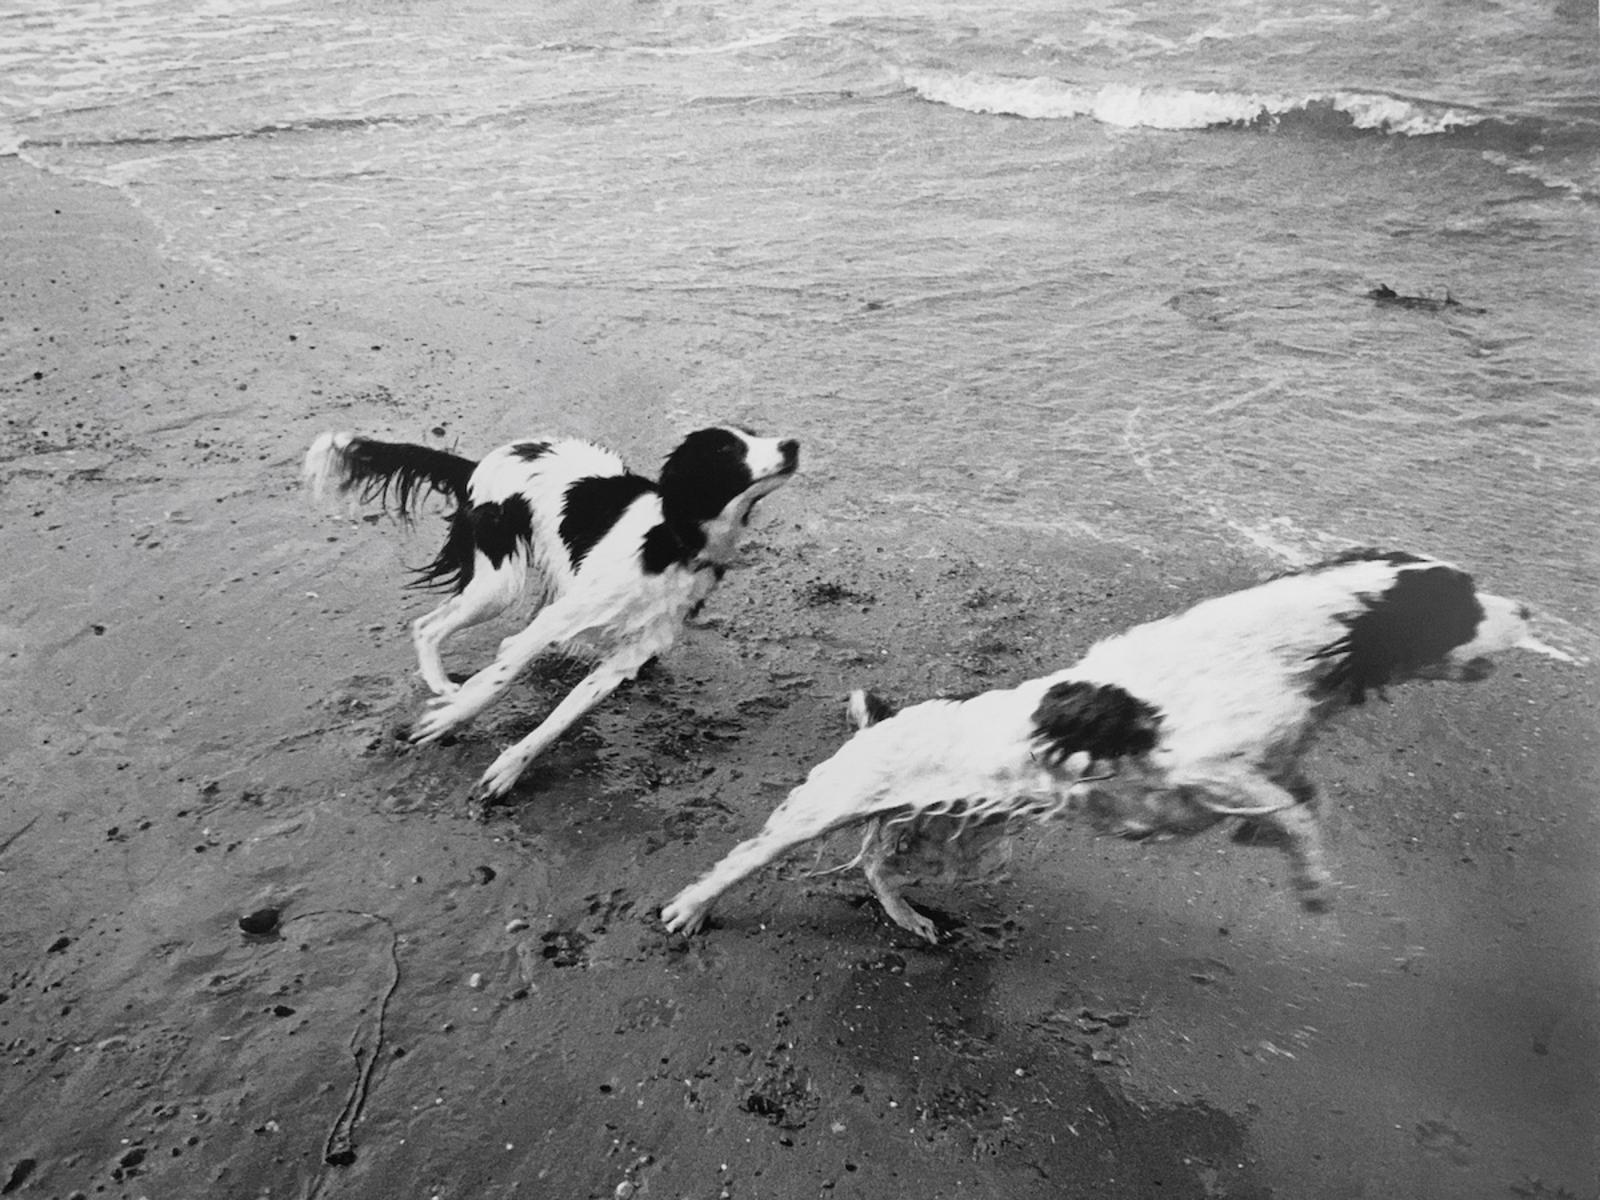 Dogs in Wales  | Buy this image